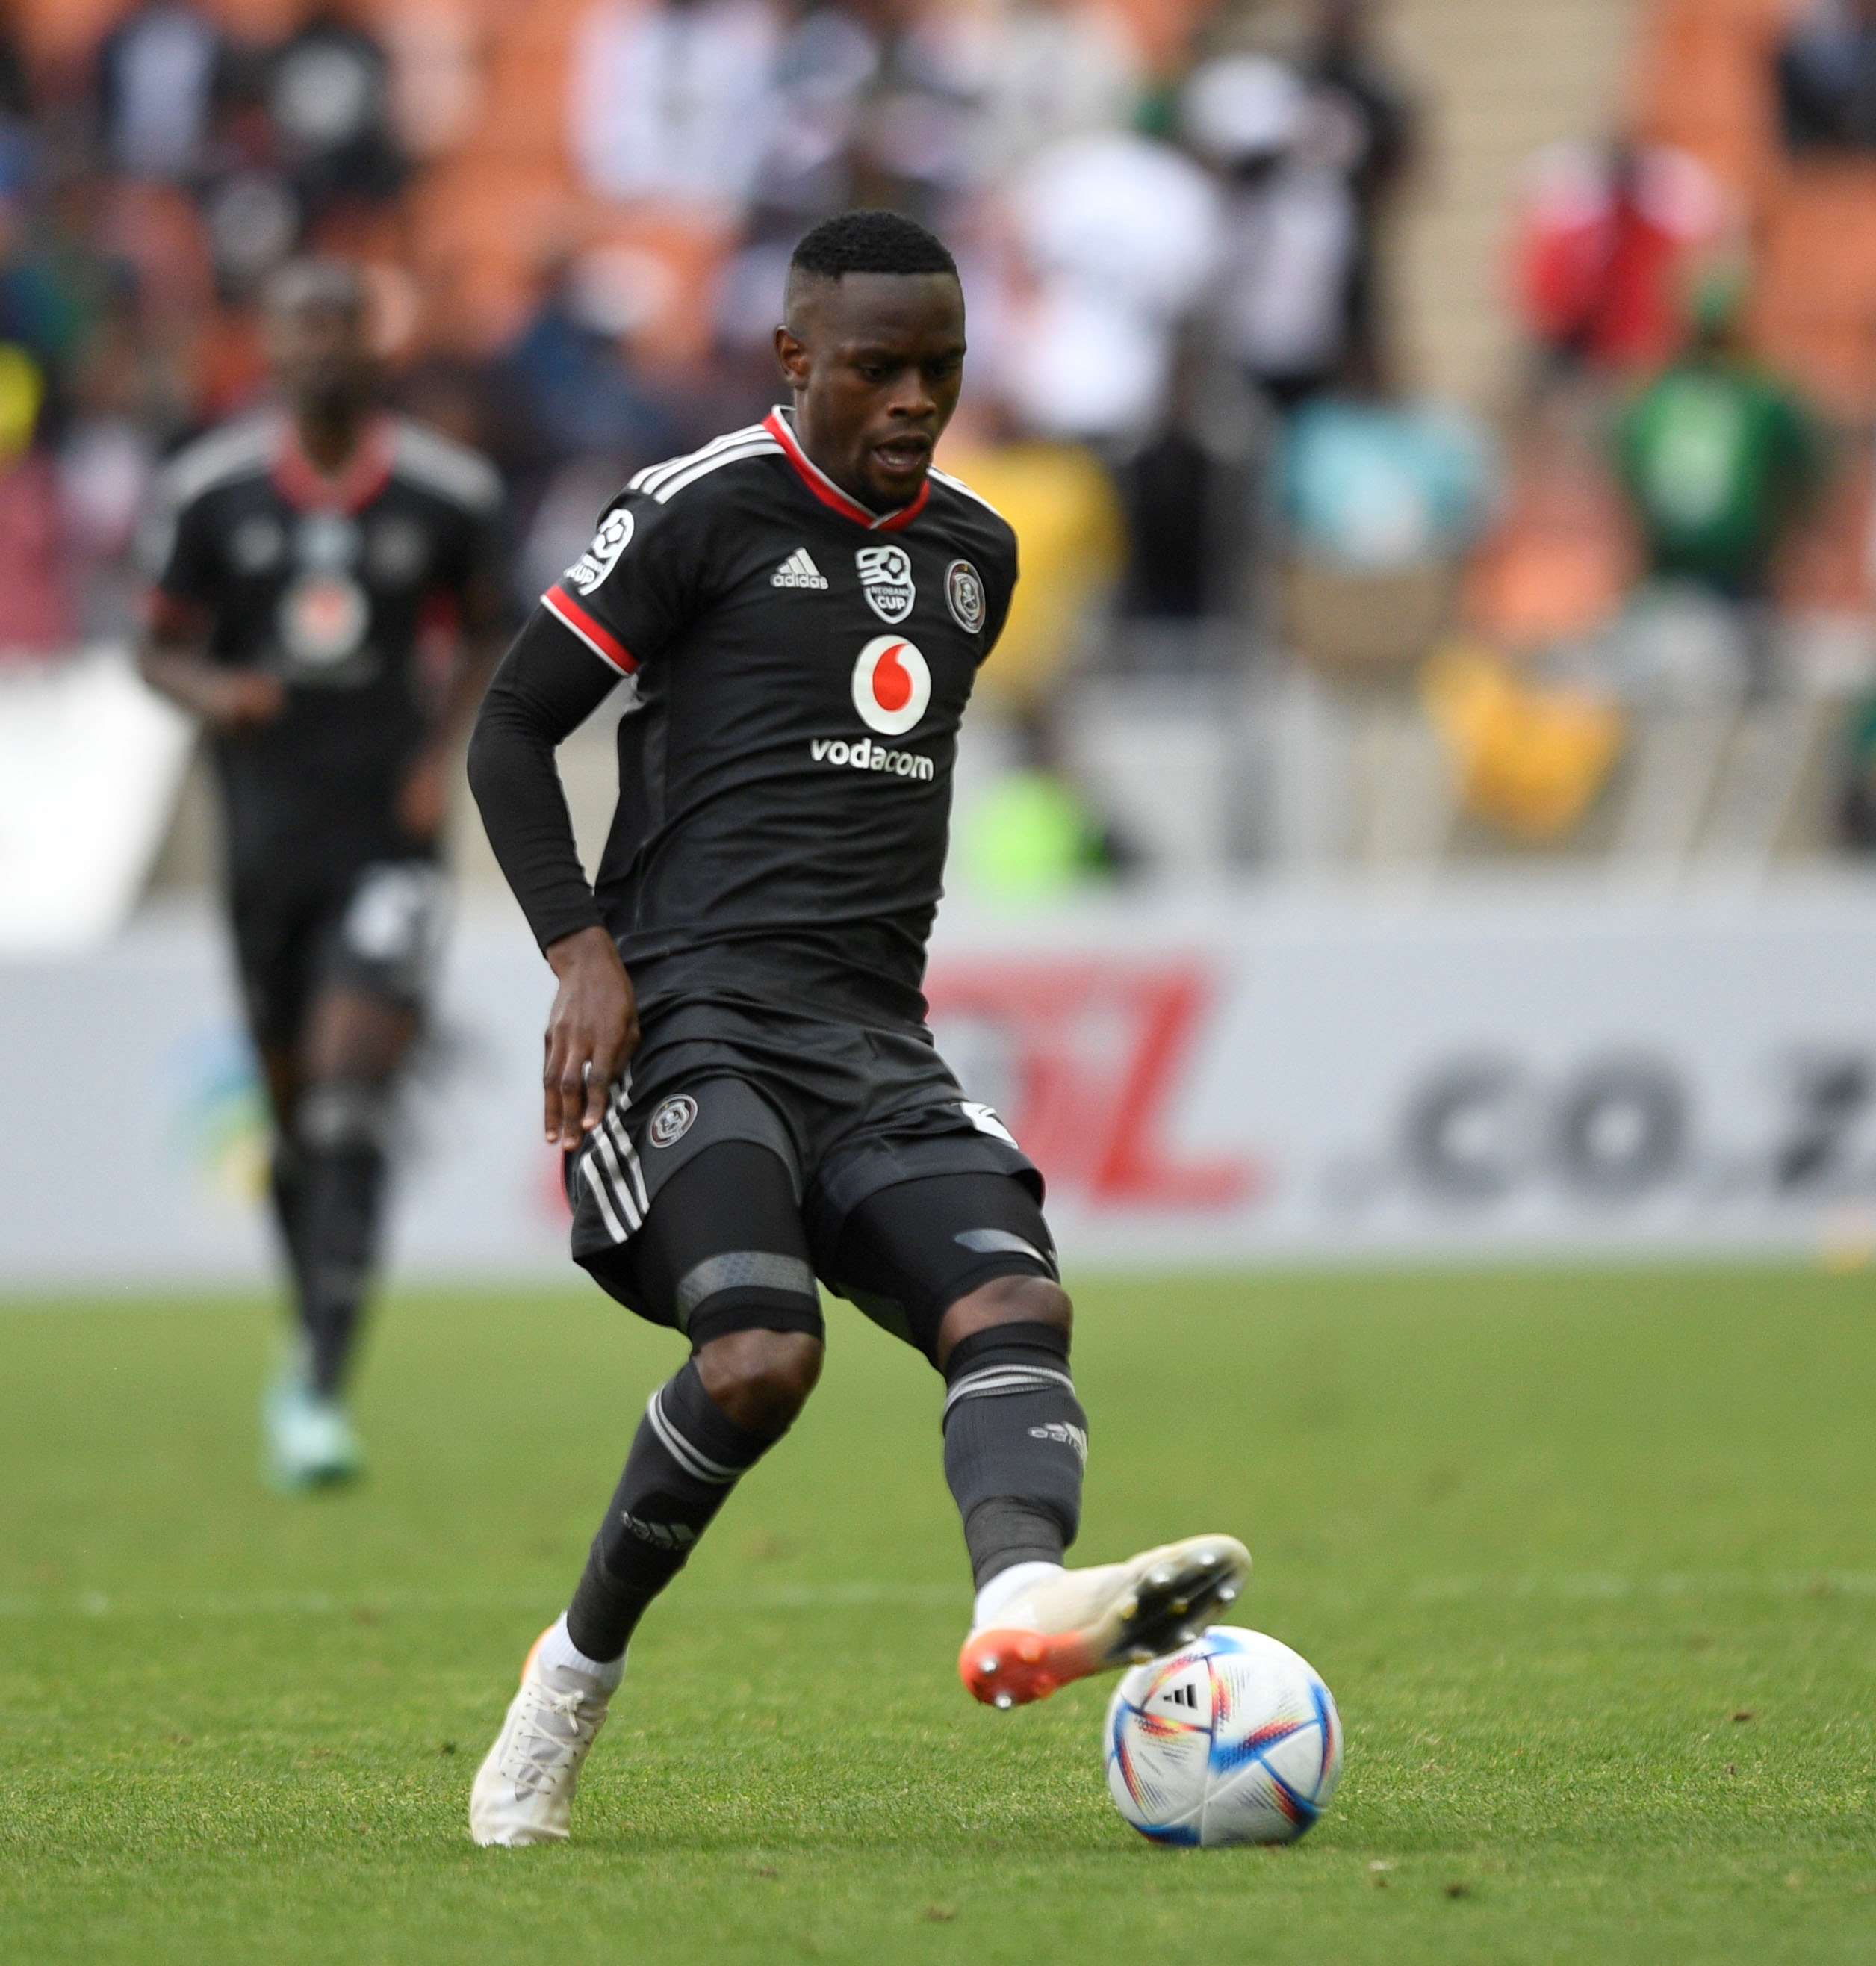 Pirates Update From Maela, New Keeper's First Words